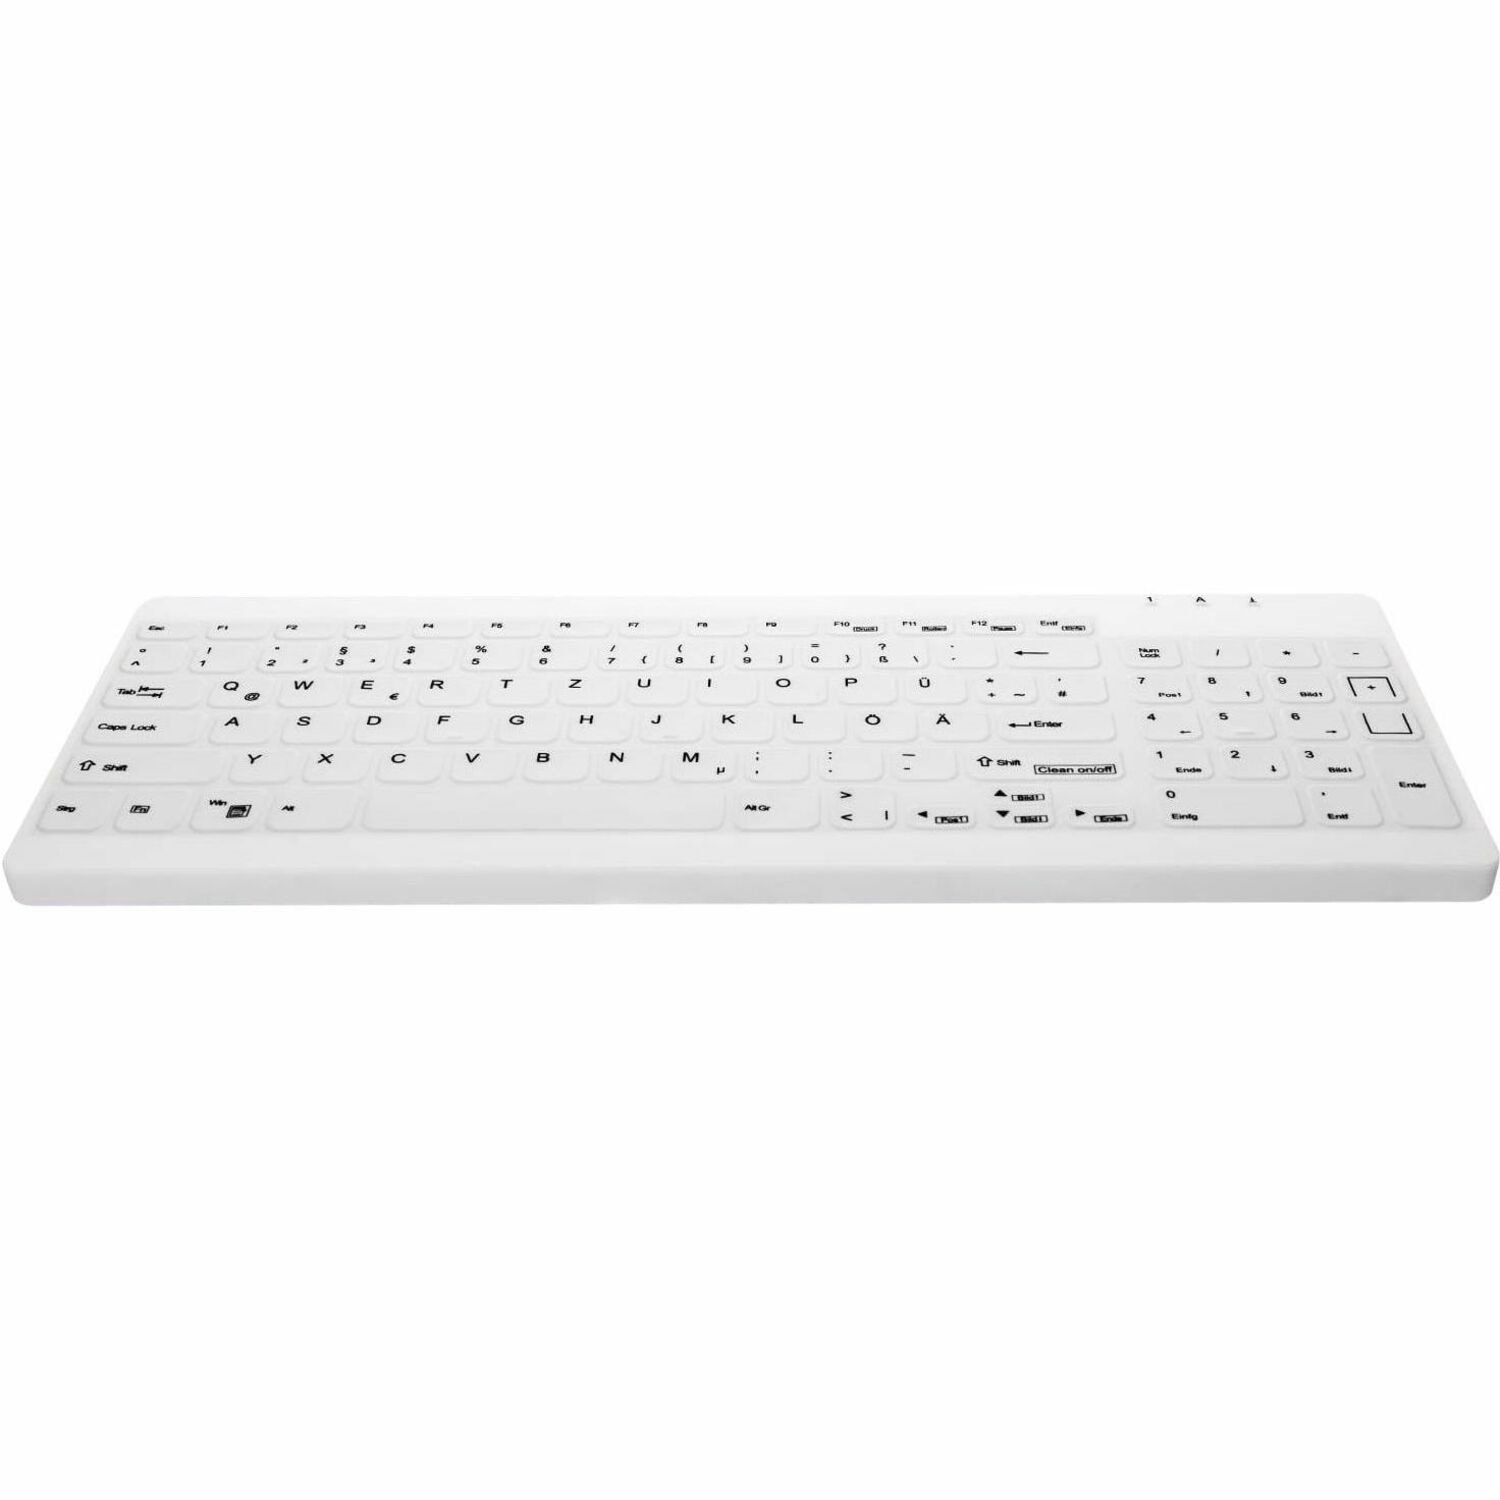 Active Key Keyboard - Cable Connectivity - USB 1.1 Type A Interface - English (US) - White